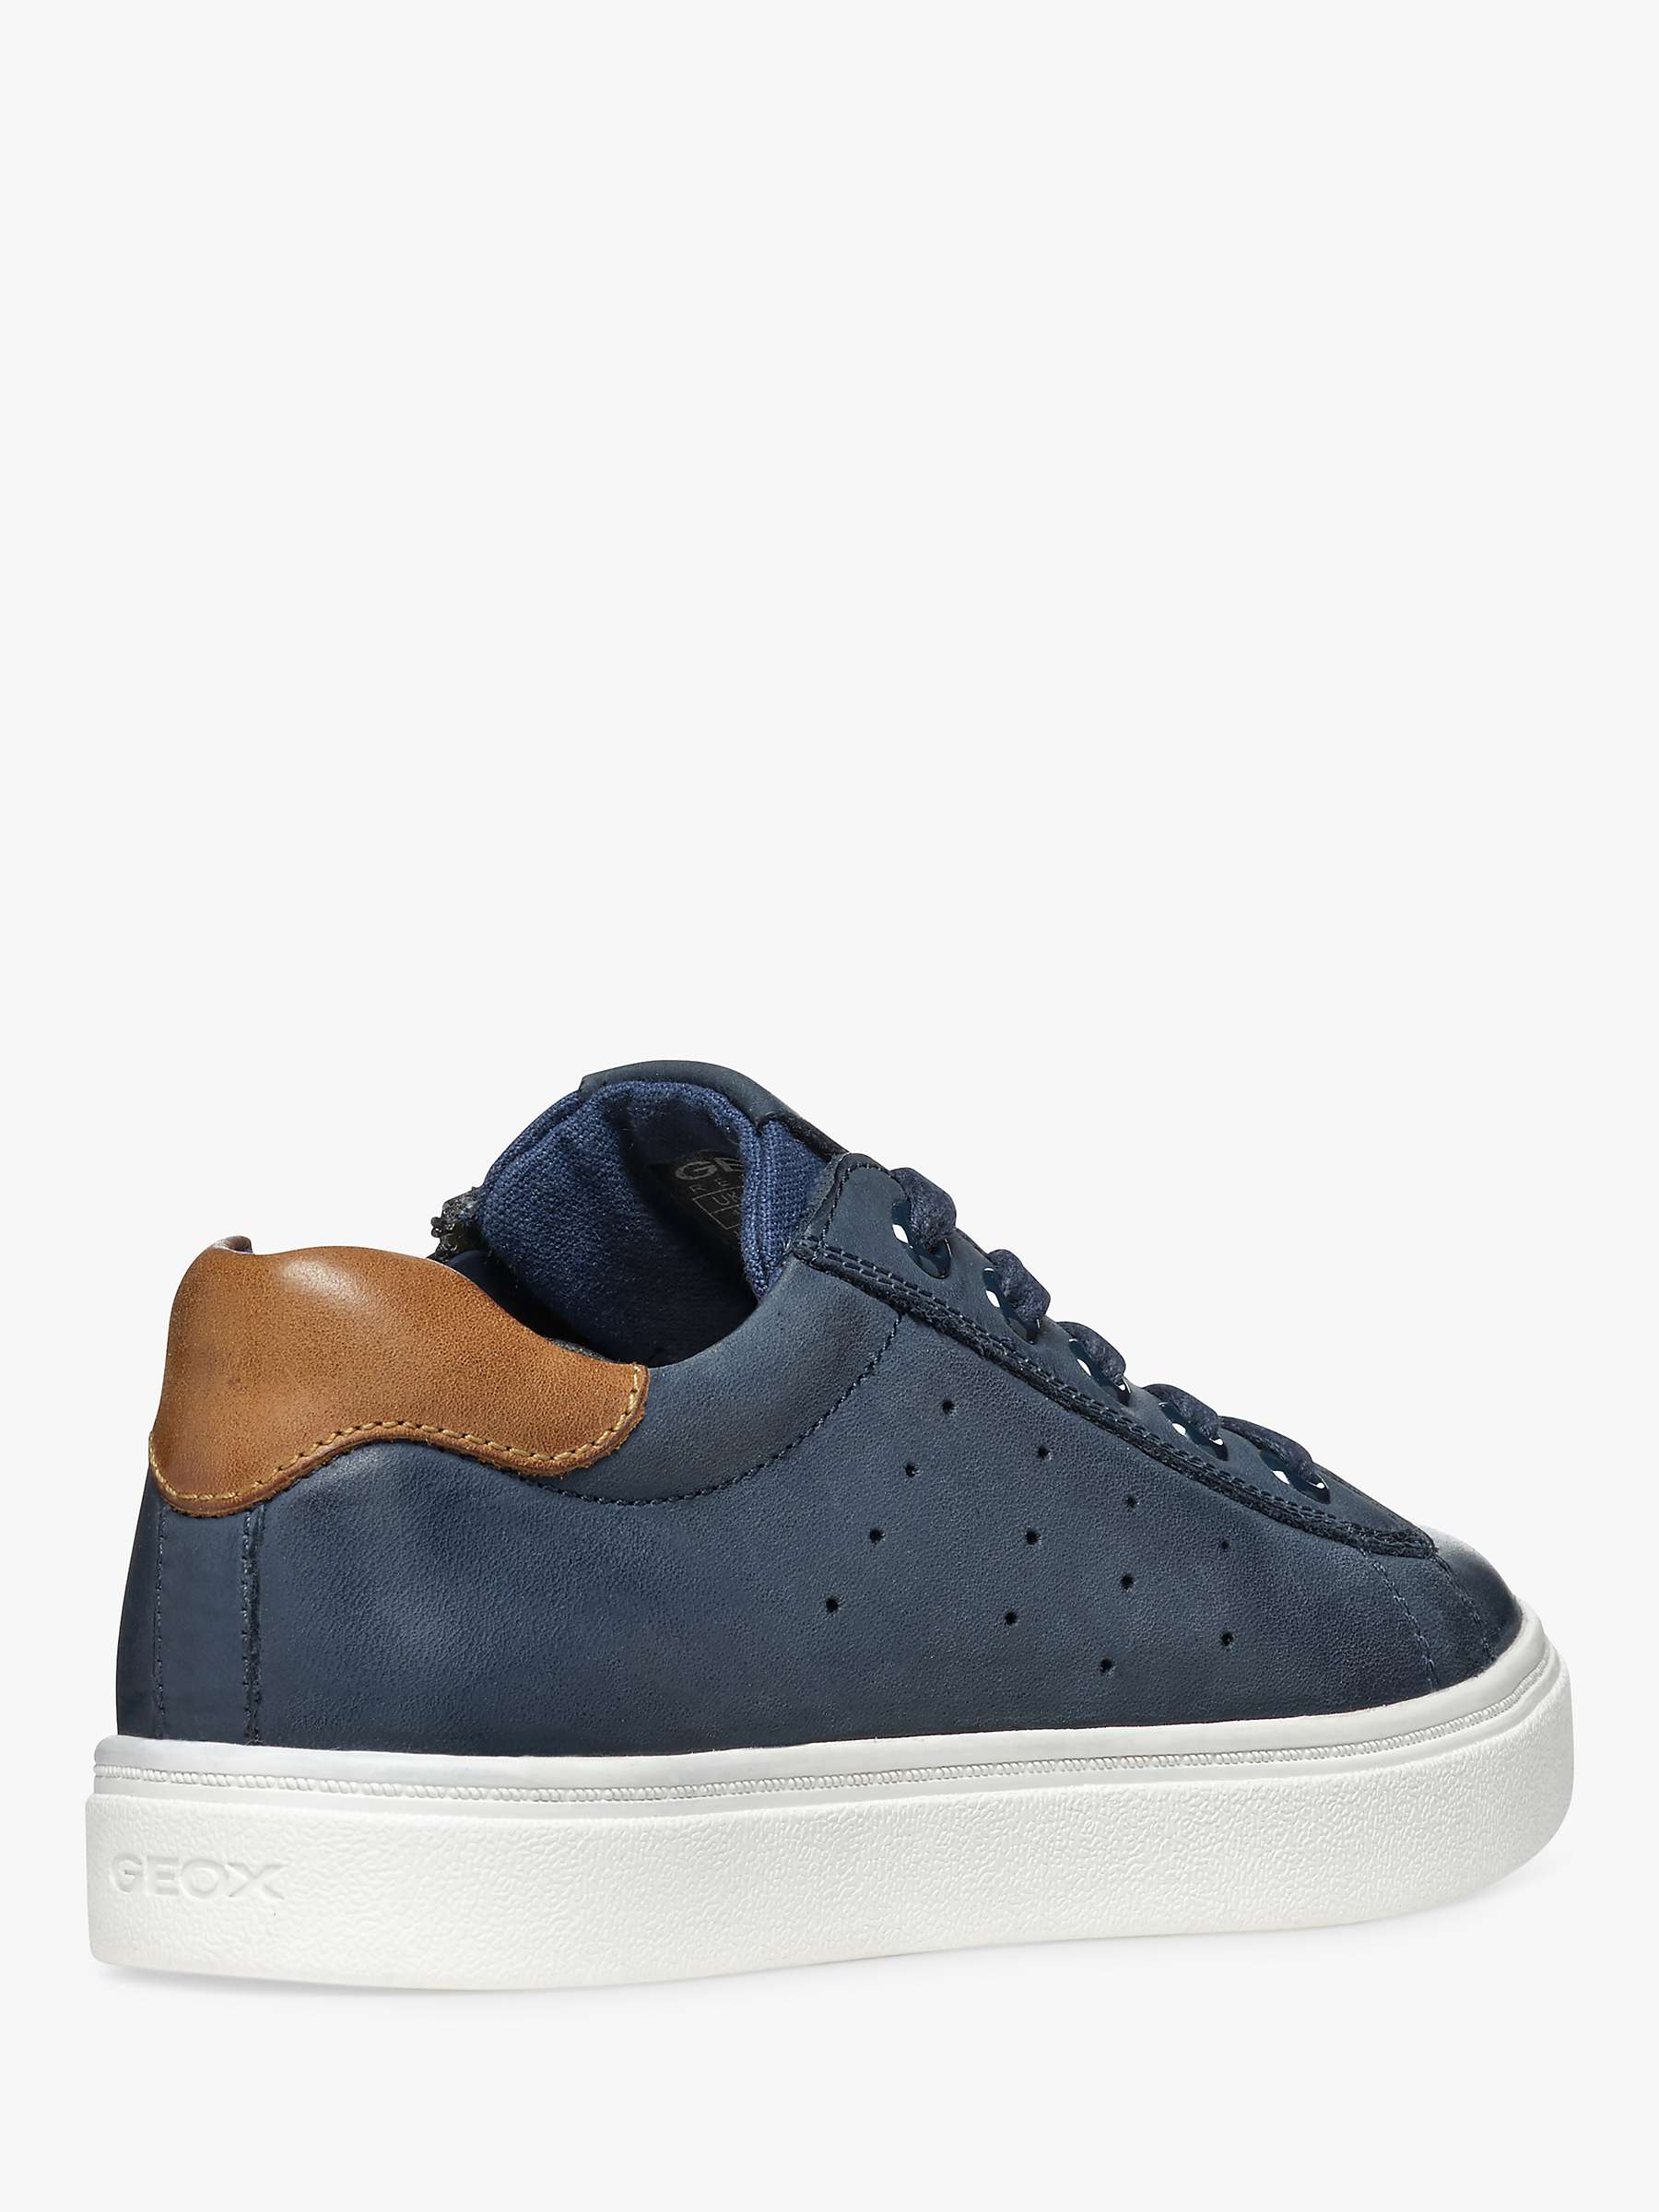 Buy Geox Kids' Nashik Leather Blend Lace Up Trainers, Navy/Brown Online at johnlewis.com